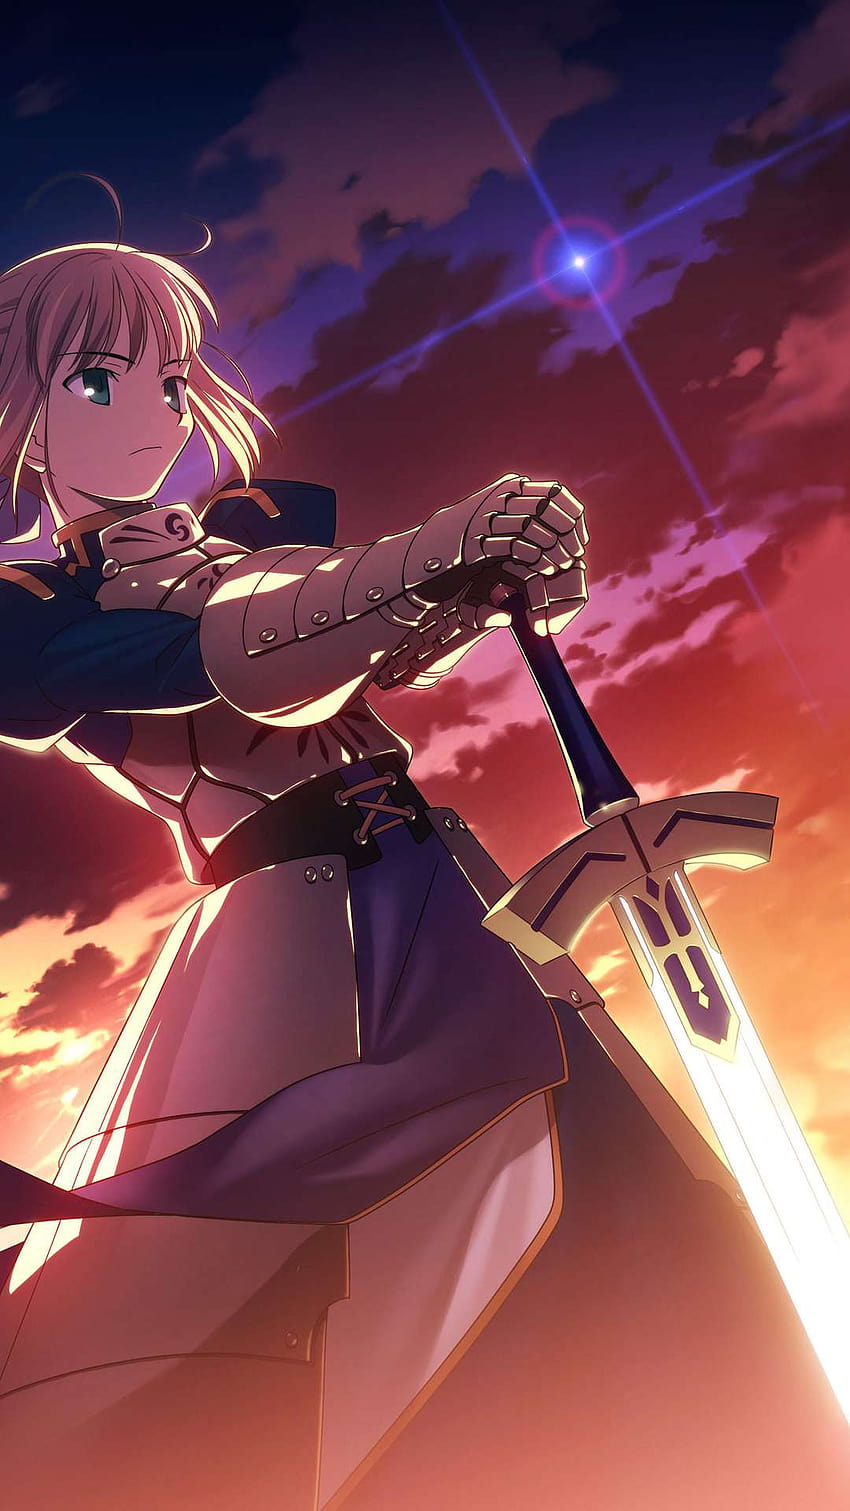 1 Fate Zero for iPhone and Android by Joseph Bentley, saber fate zero HD phone wallpaper